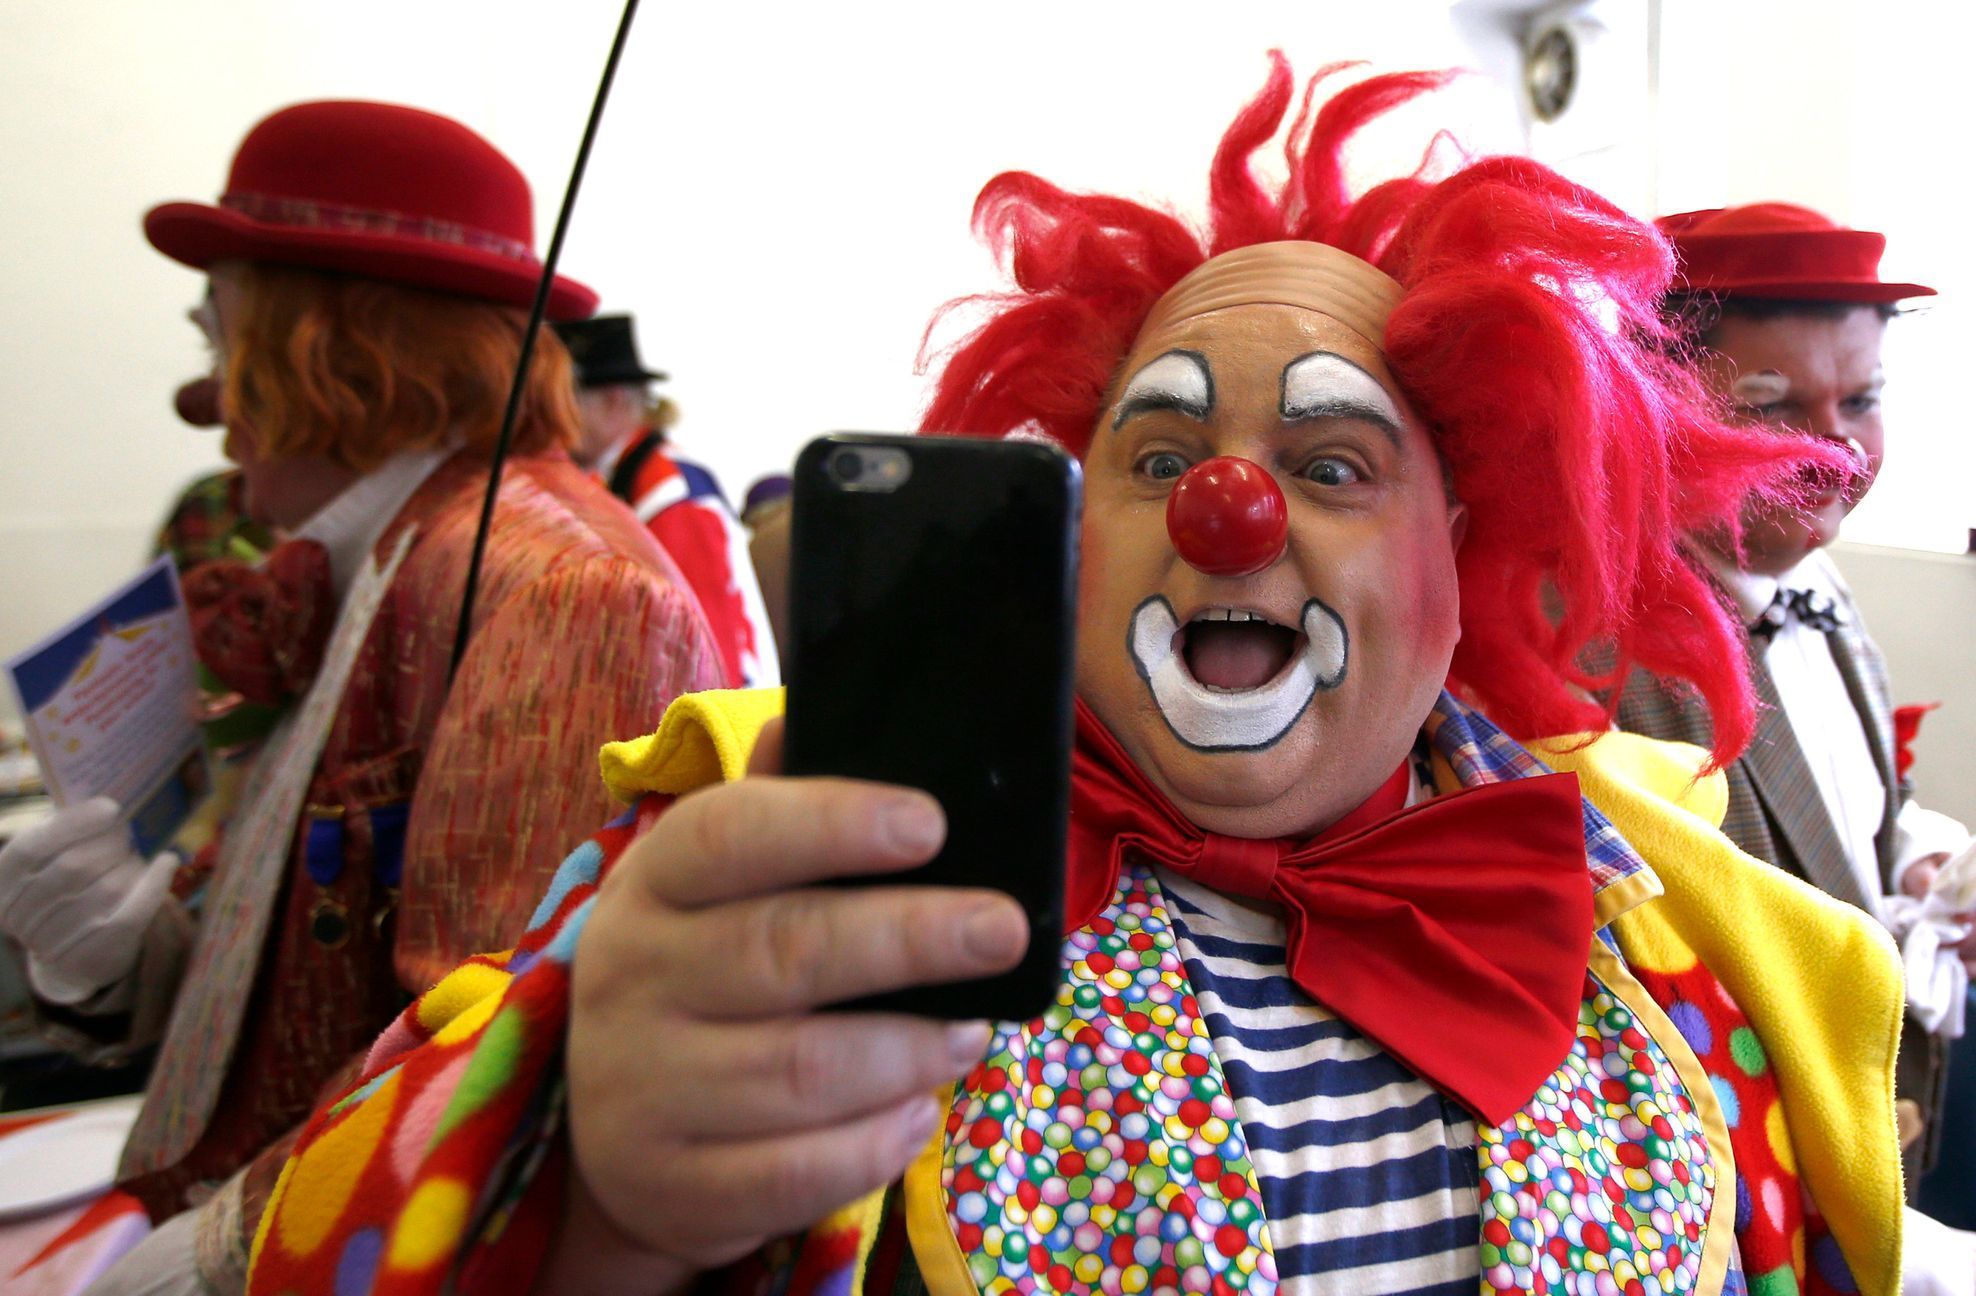 A clown takes a selfie at the All Saints Church hall before the Grimaldi clown service in Dalston, north London